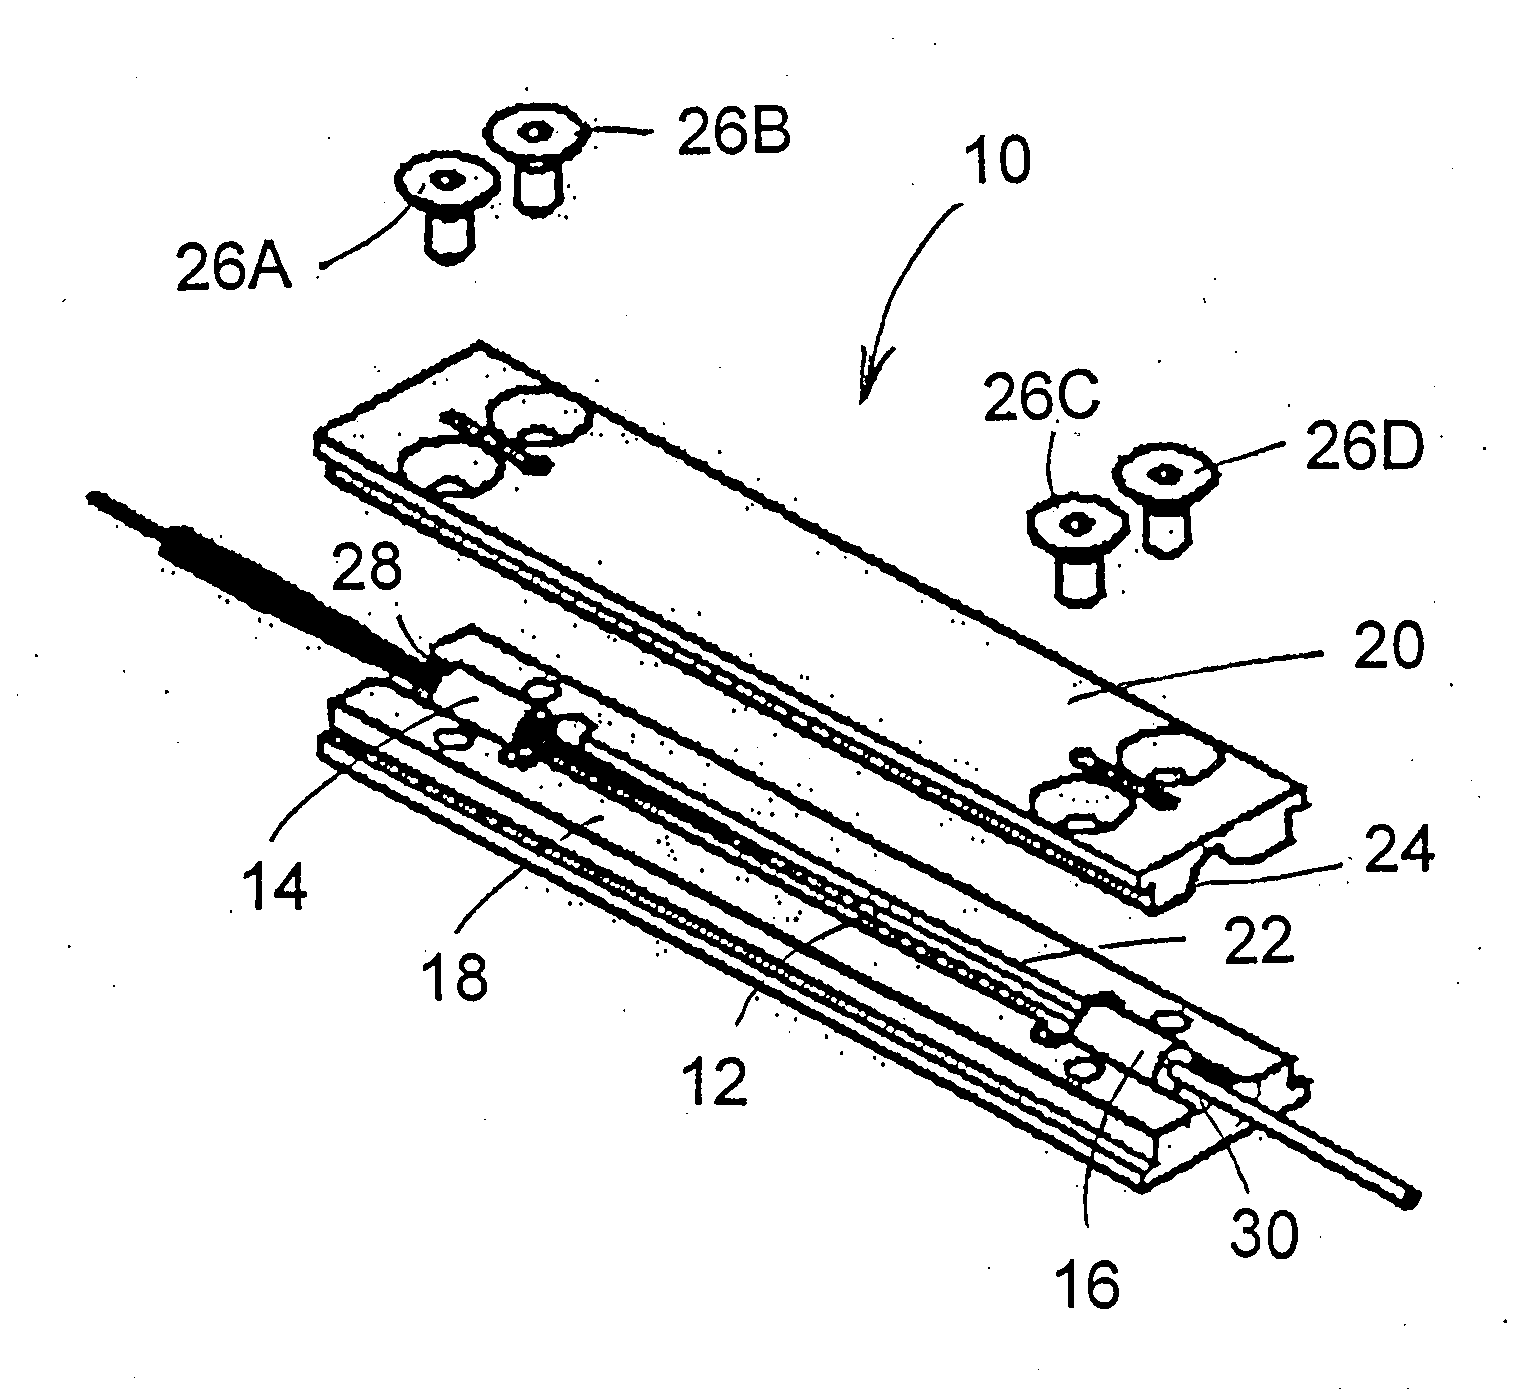 Optical fiber component package for high power dissipation